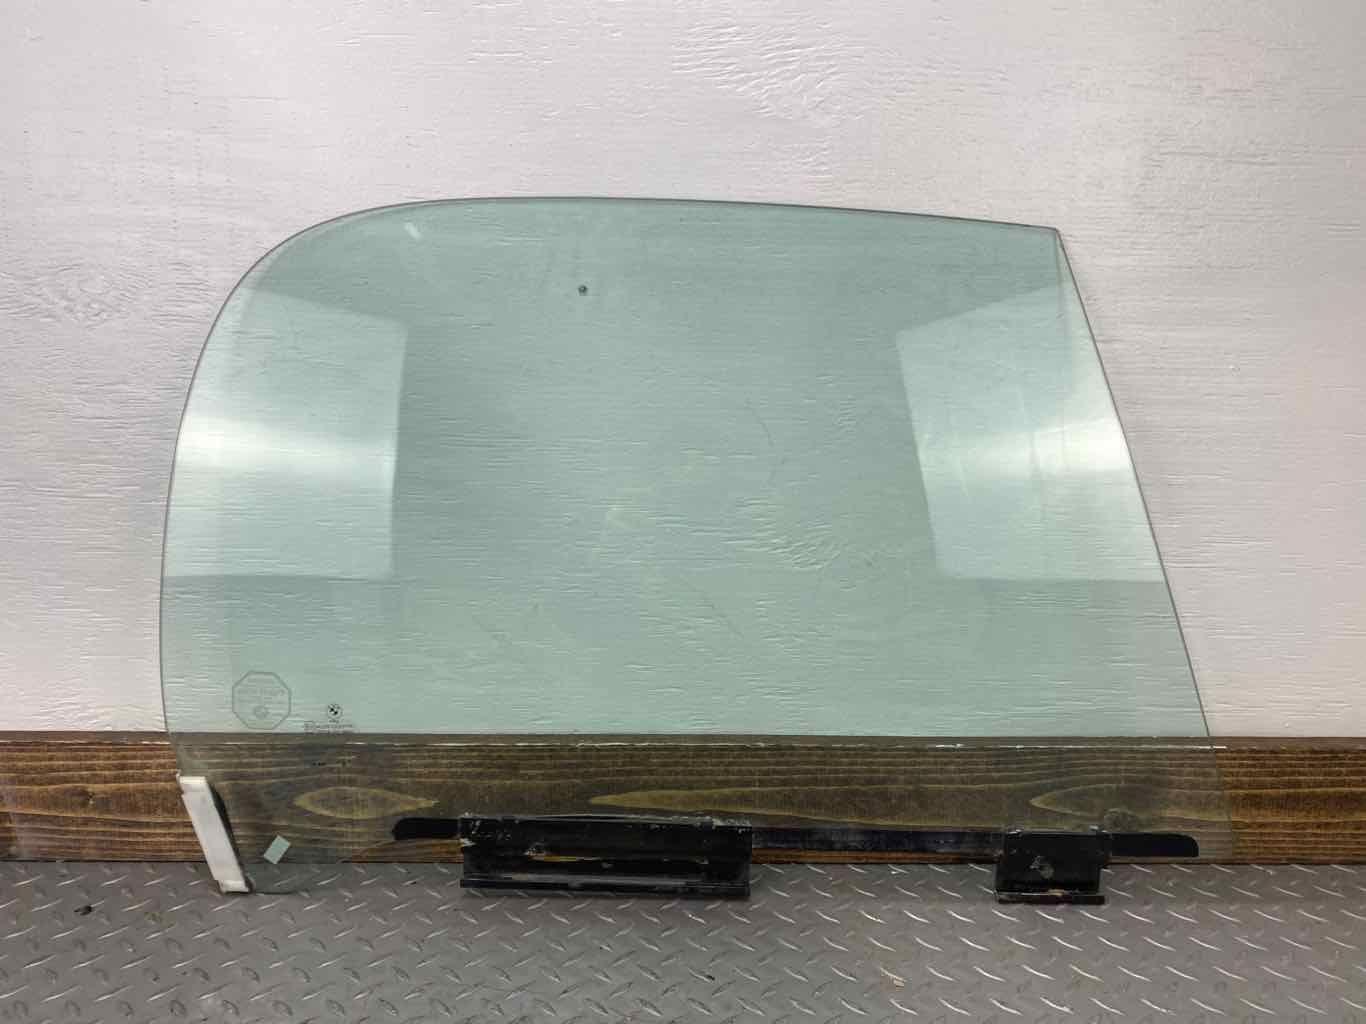 96-02 BMW Z3 Roadster Convertible Right RH Door Window Glass (Glass Only)